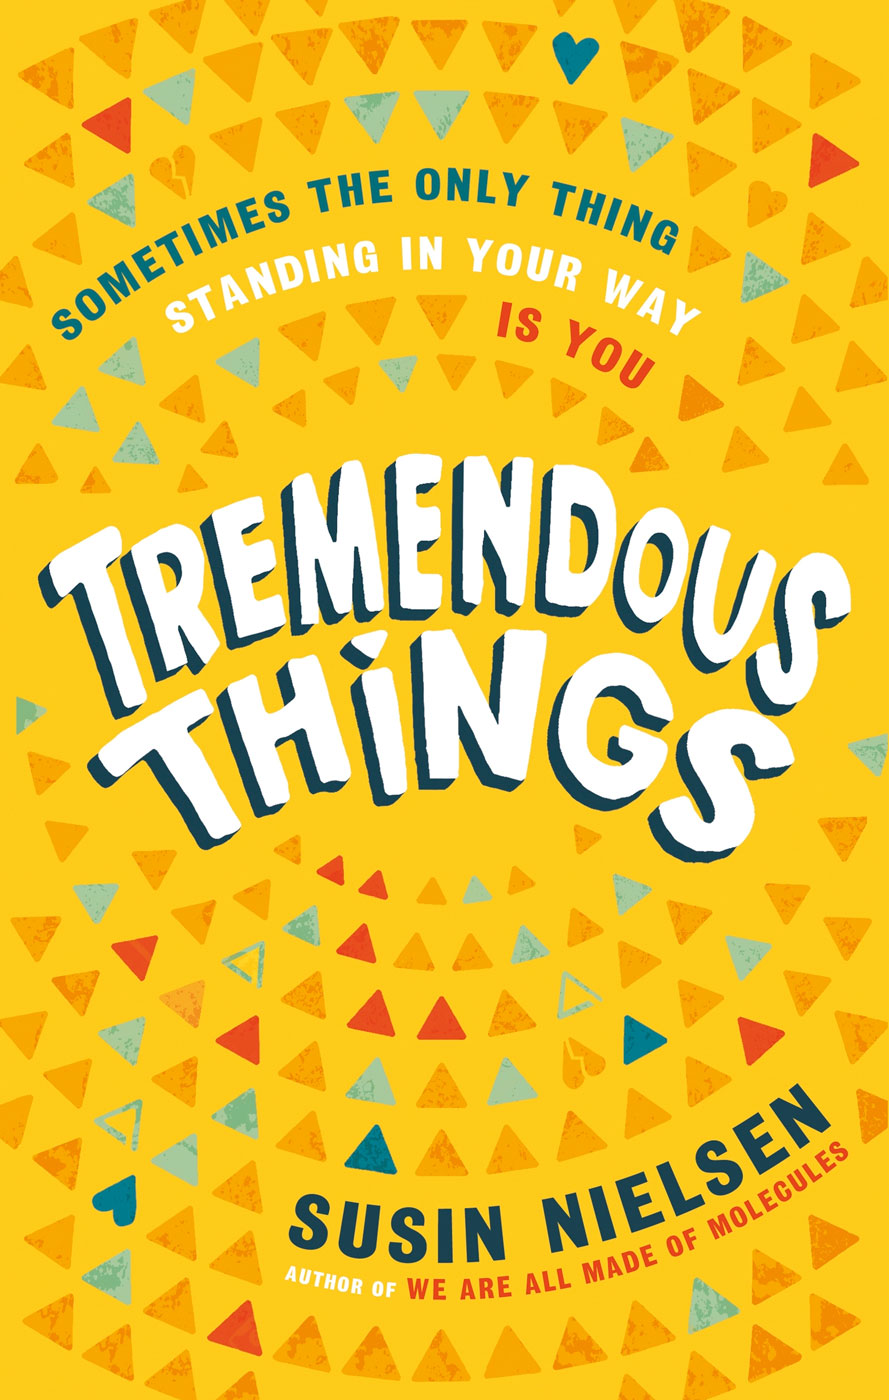 Tremendous Things cover image